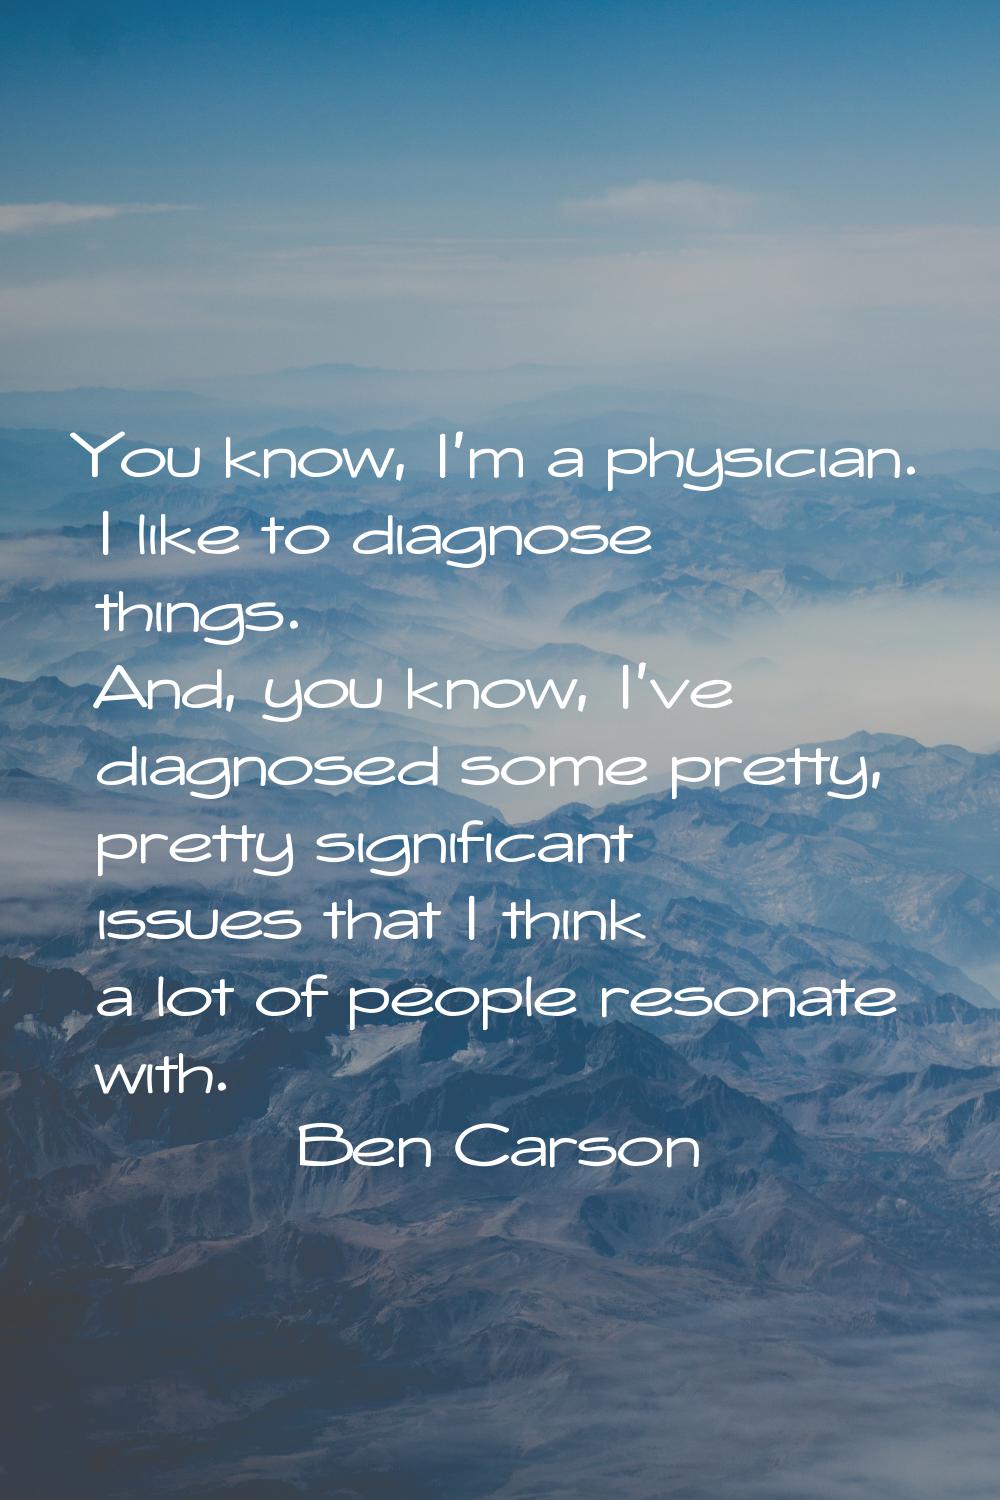 You know, I'm a physician. I like to diagnose things. And, you know, I've diagnosed some pretty, pr